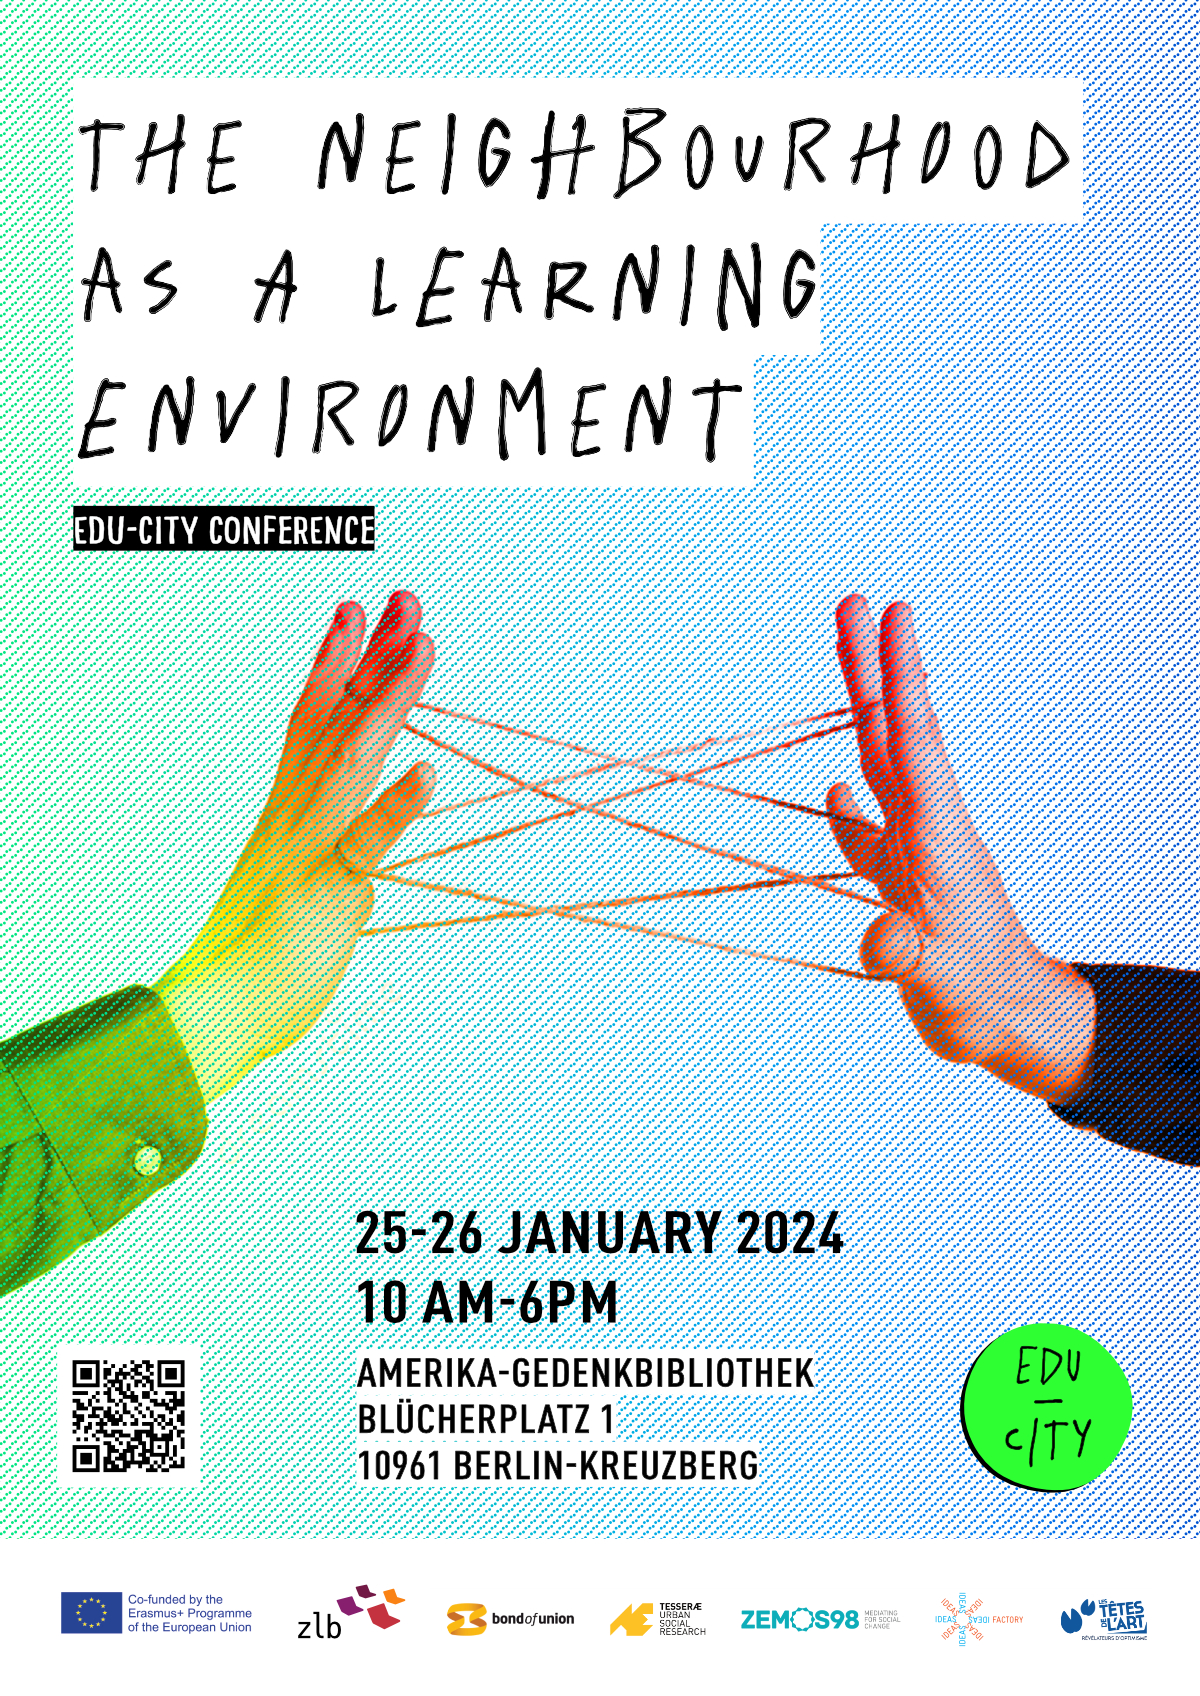 Poster of EDU-CITY conference